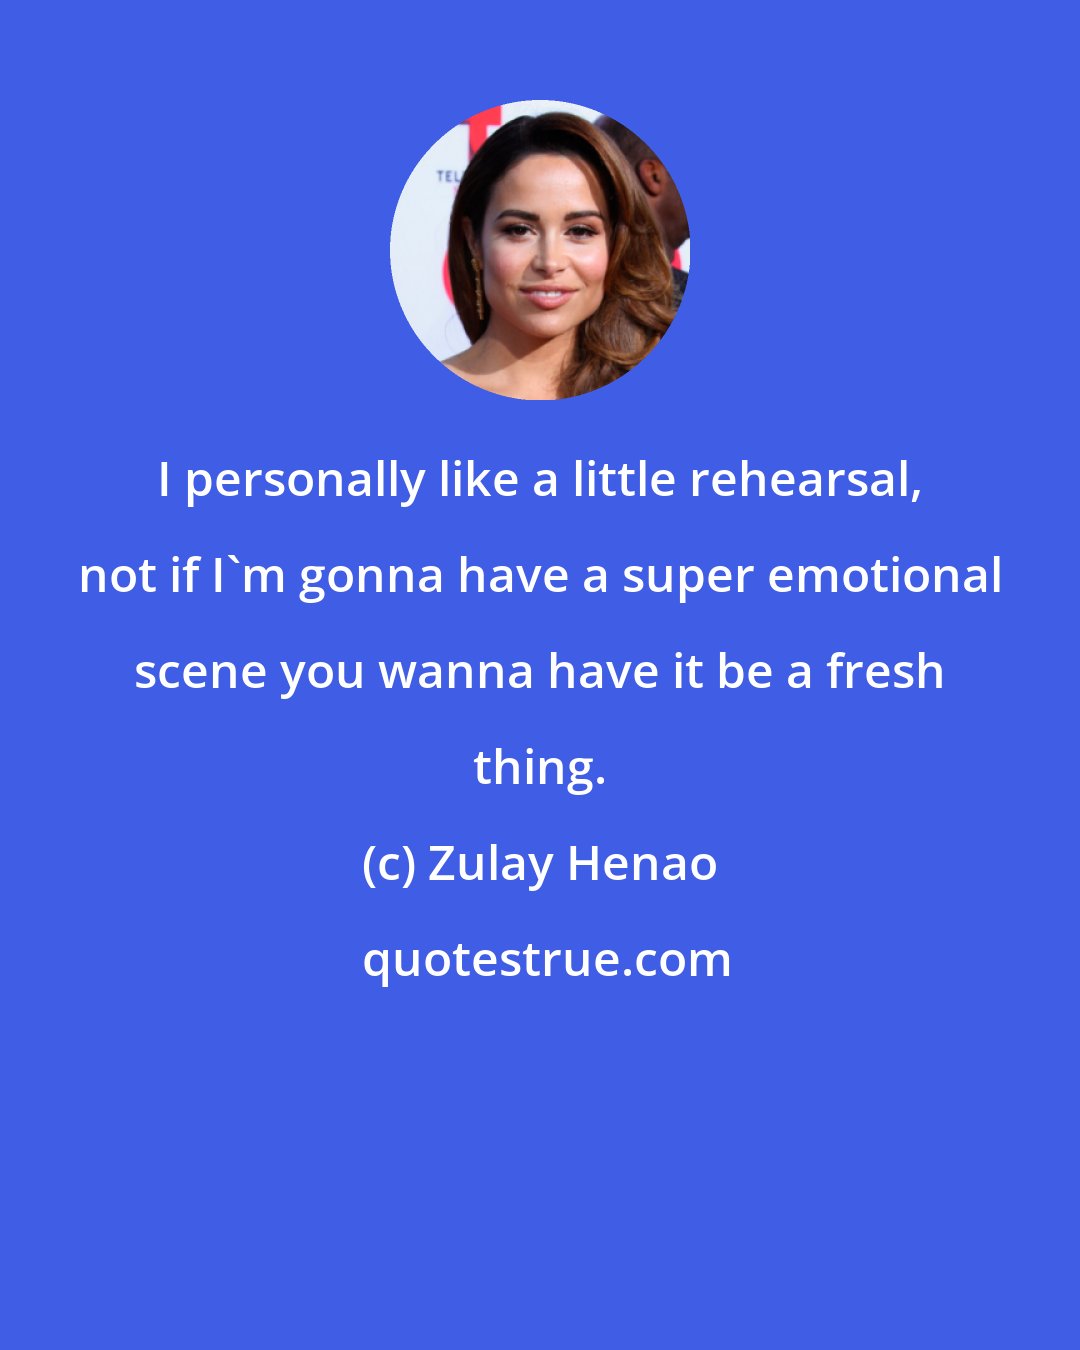 Zulay Henao: I personally like a little rehearsal, not if I'm gonna have a super emotional scene you wanna have it be a fresh thing.